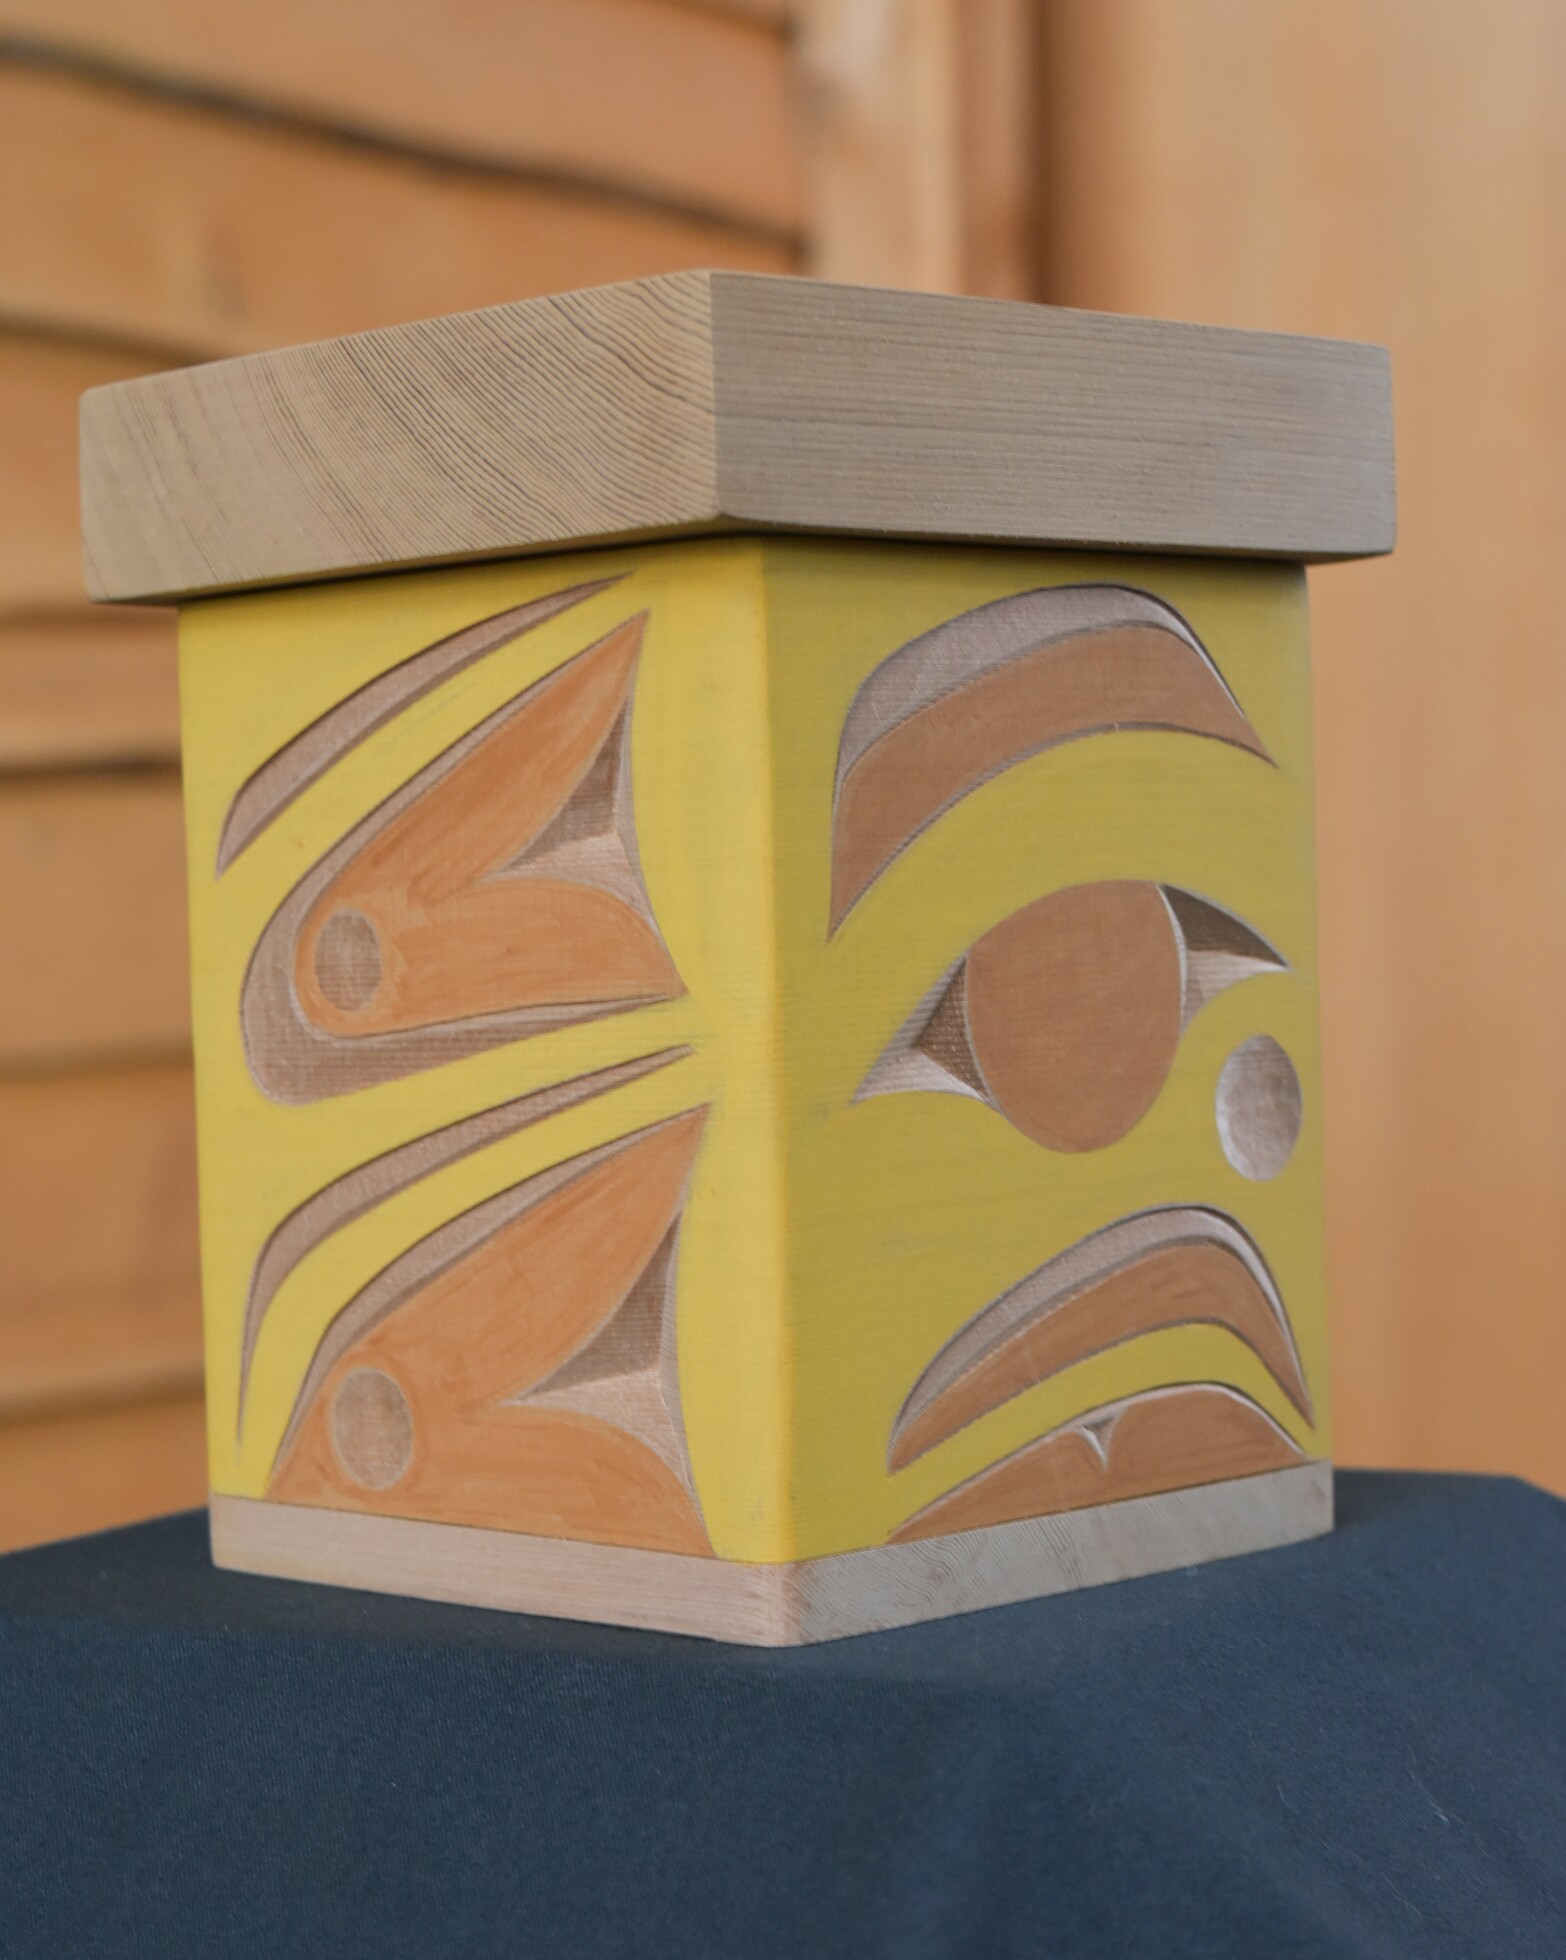 Whimsical Gold Finch Bentwood Box - Andy Peterson (Skokomish